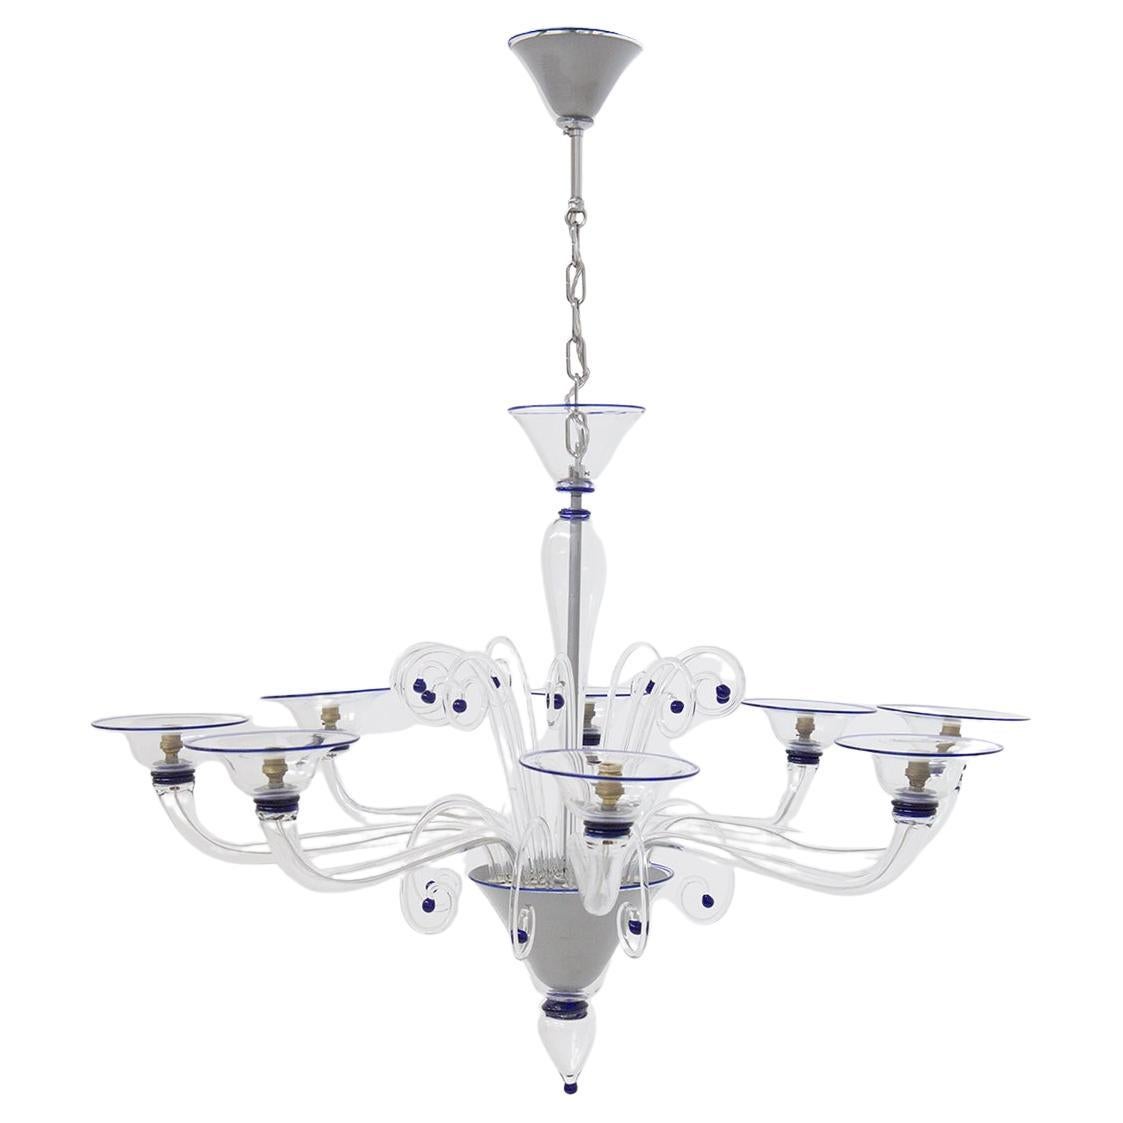 Murano Glass Vintage Chandelier with Blue Elements